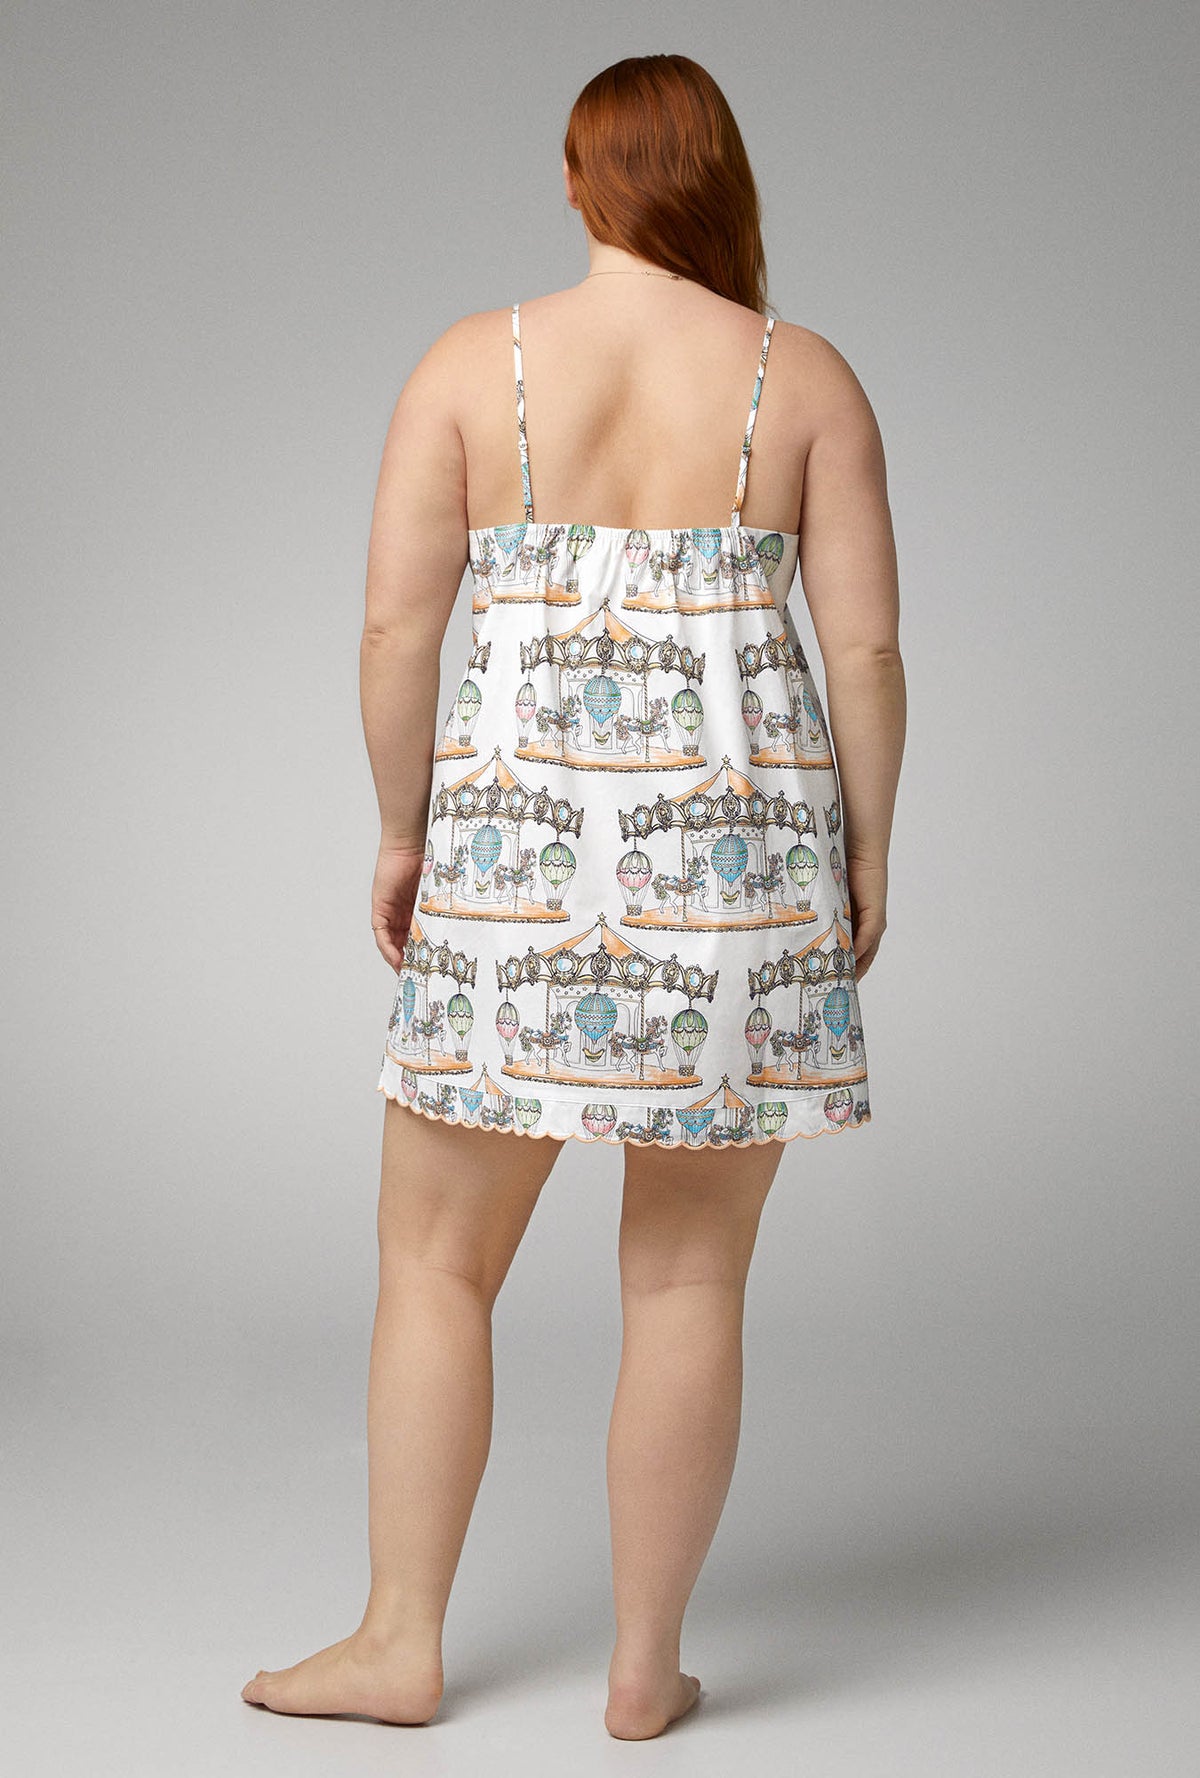 A lady wearing white  sleeveless woven cotton poplin plus size chemise with carousel scallop print.